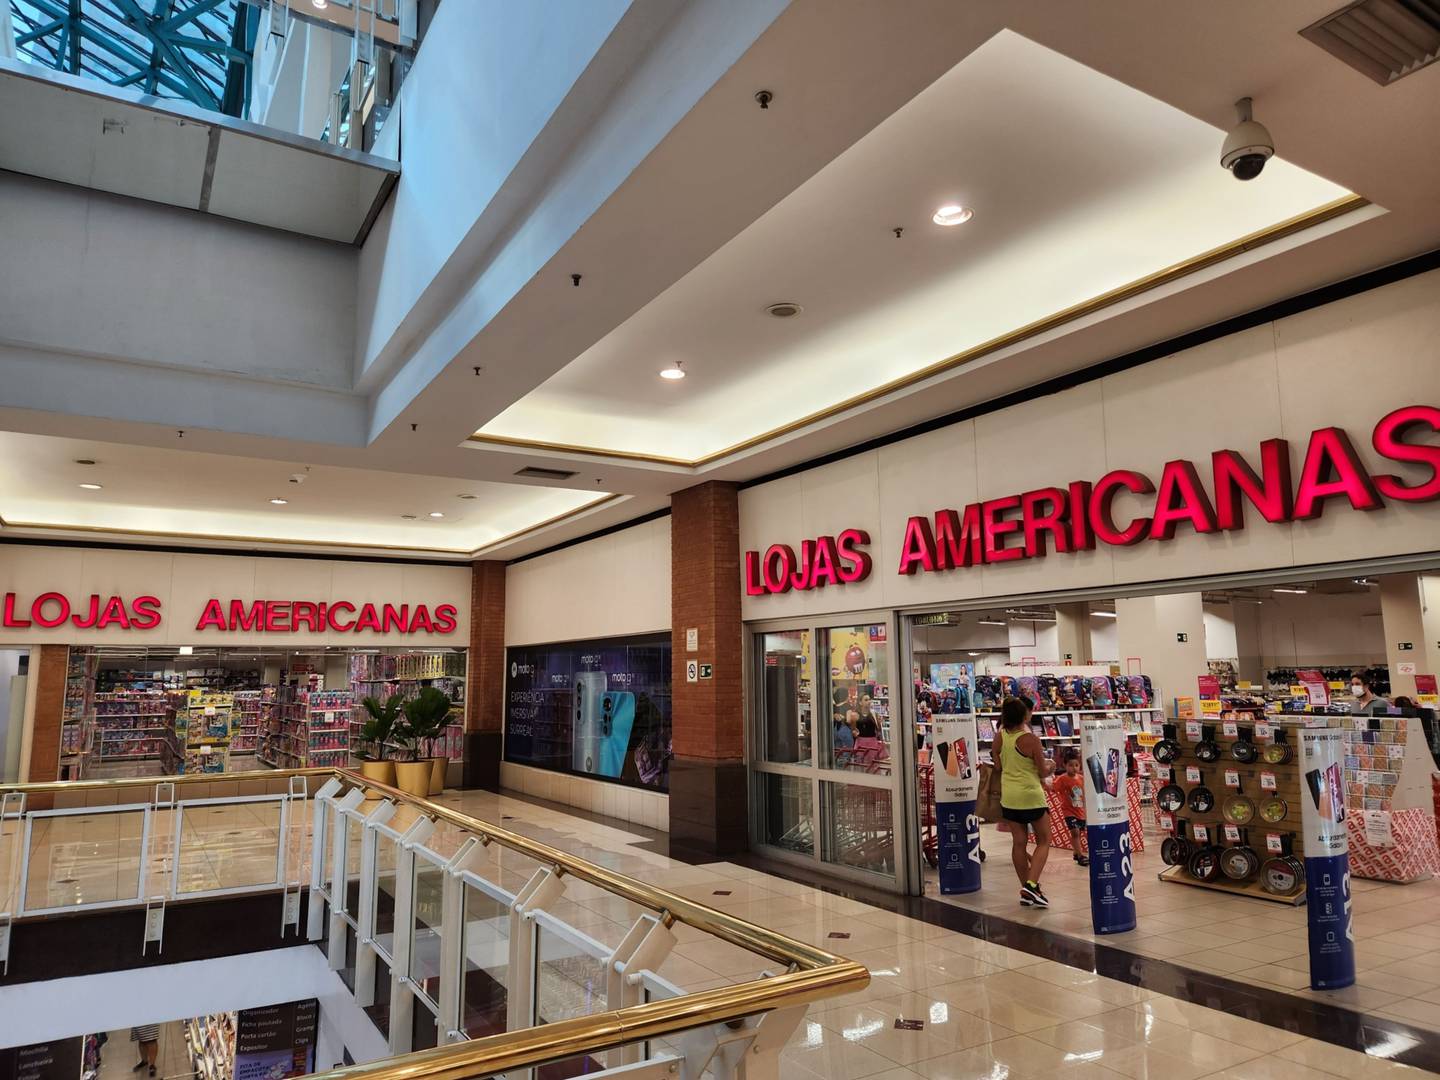 Americanas filed for bankruptcy protection last month, just days after finding 20 billion reais ($3.9 billion) of “accounting inconsistencies.”